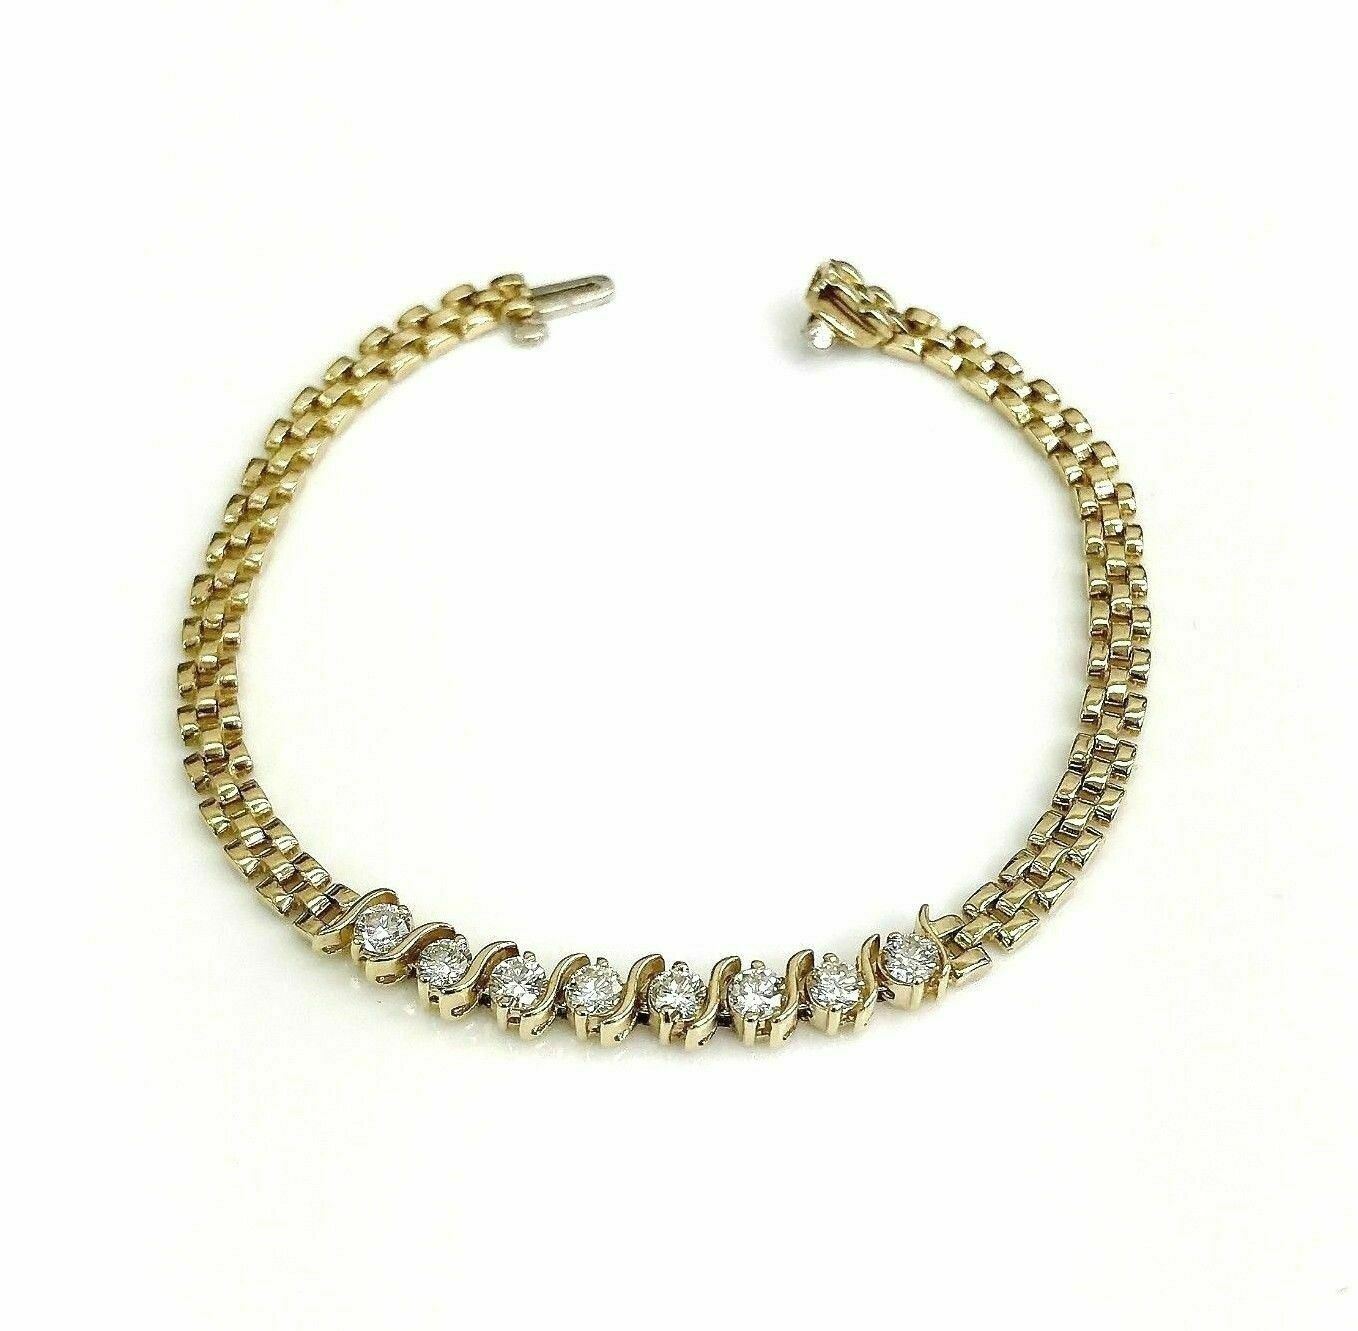 1.10Cts Round Diamond S Style Link Tennis Bracelet 14K Yelow Gold 7 Inches Long